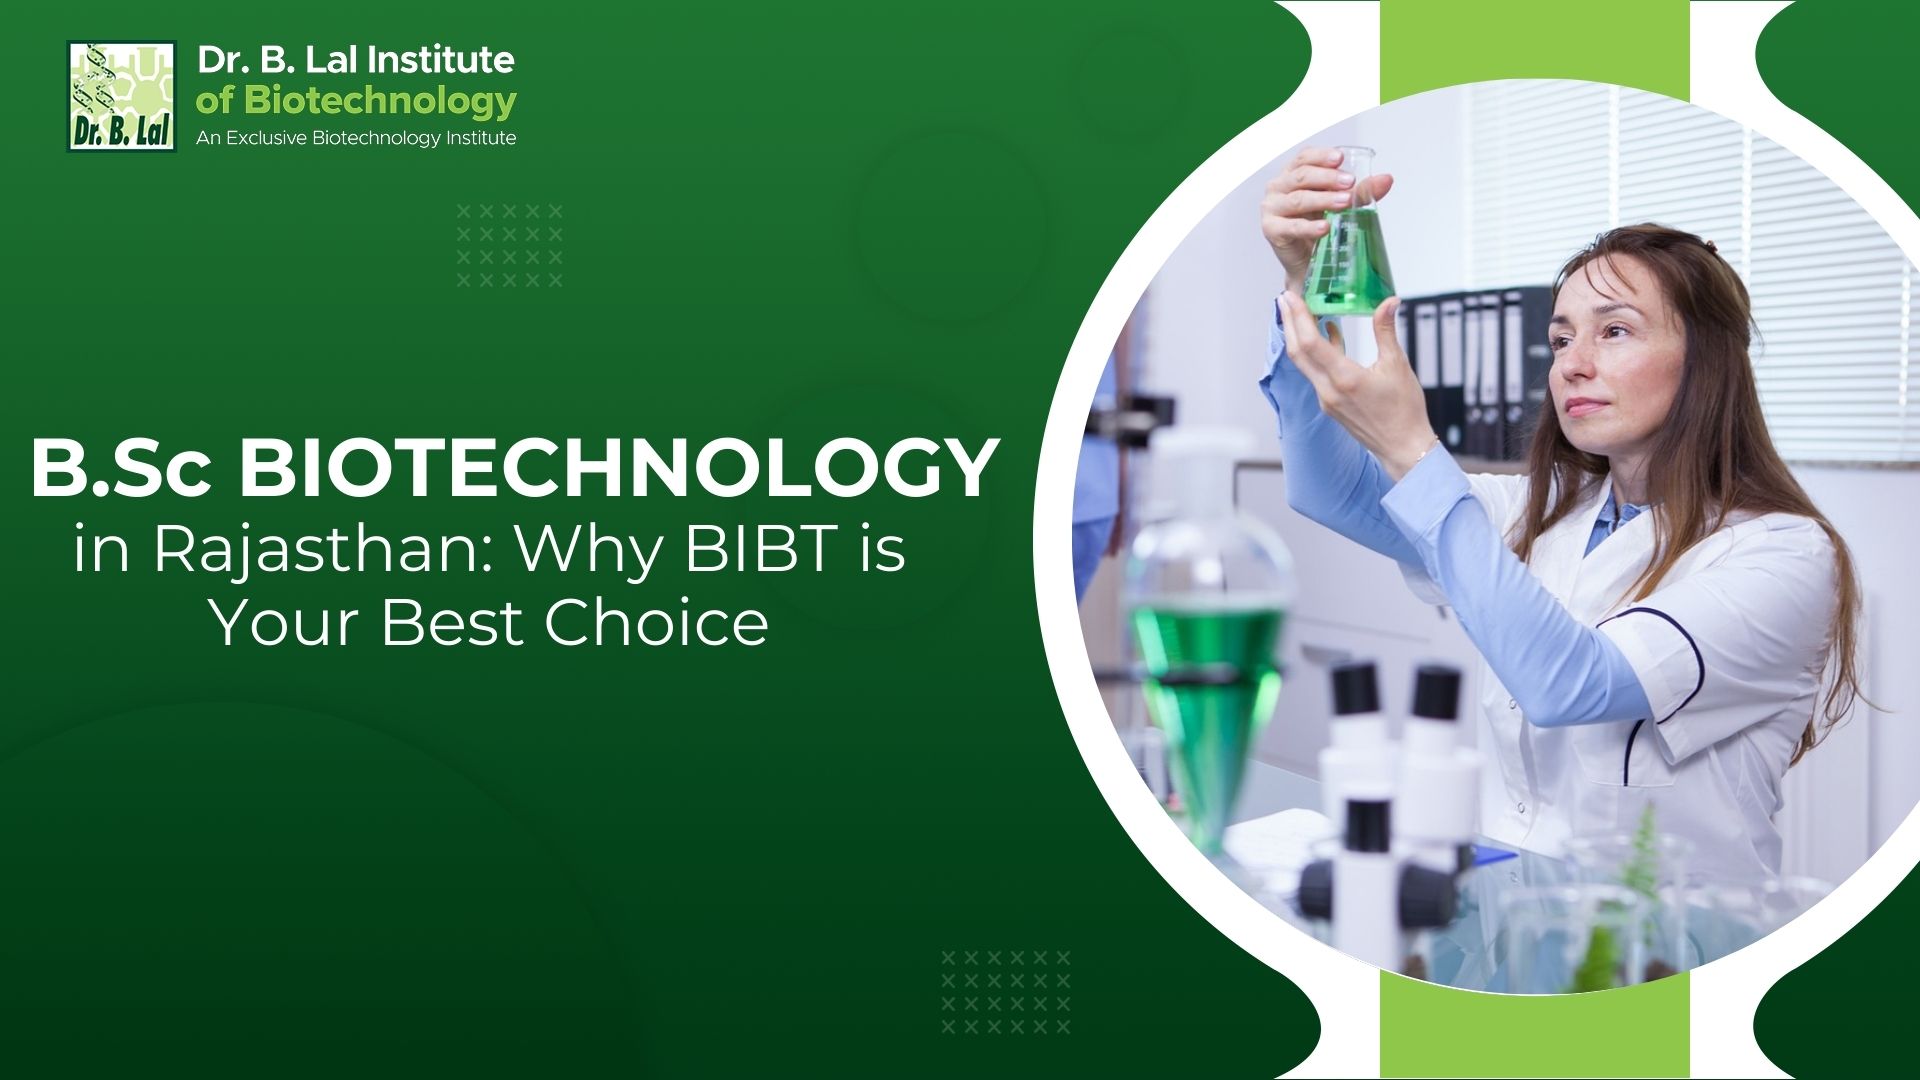 B.Sc Biotechnology in Rajasthan: Why BIBT is Your Best Choice